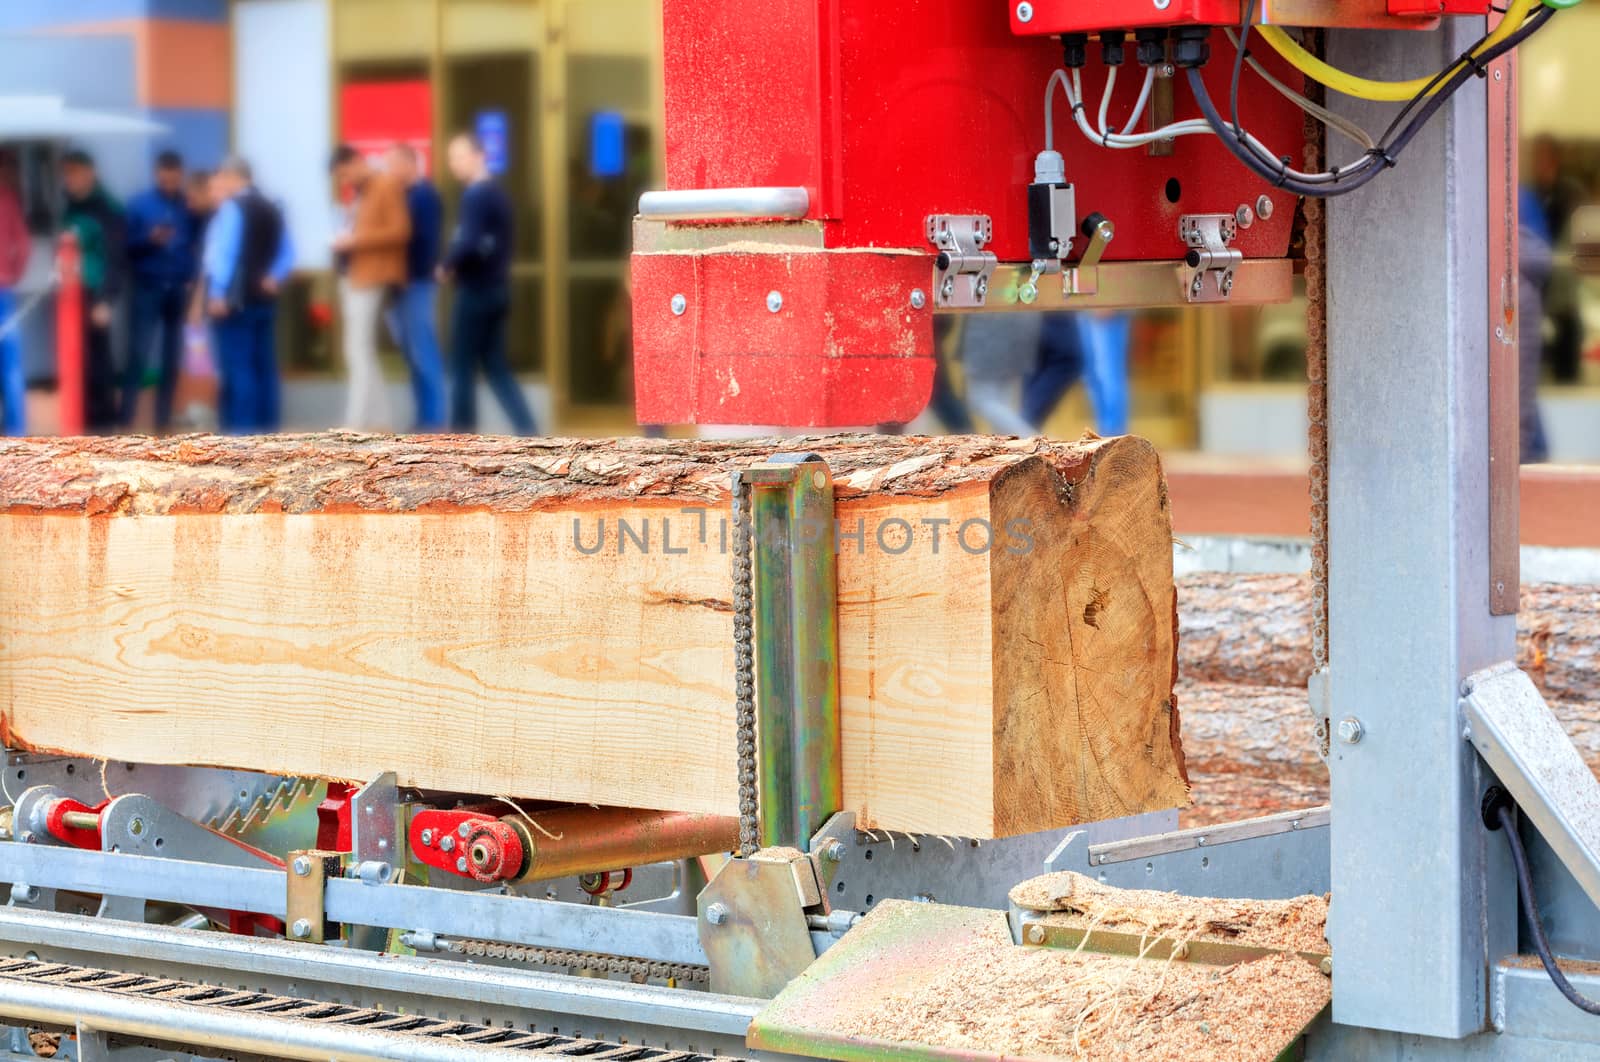 Modern woodworking technology, automatic sawmill, close-up, background in blur.